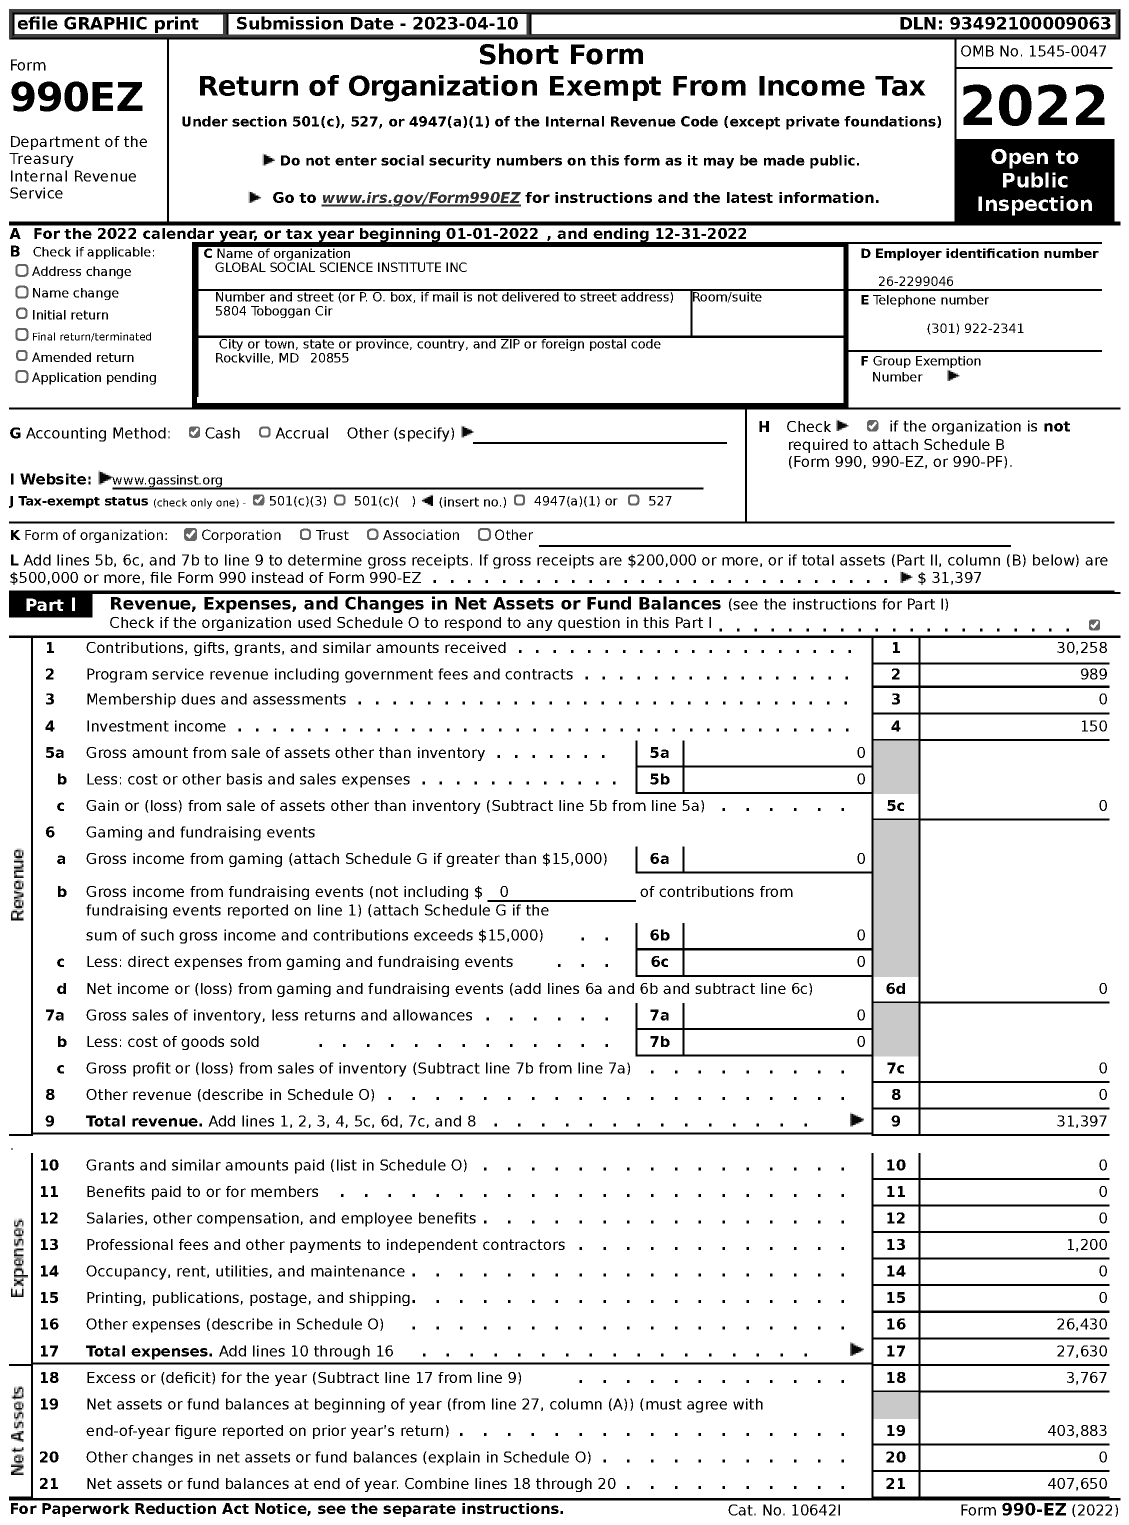 Image of first page of 2022 Form 990EZ for Global Social Science Institute